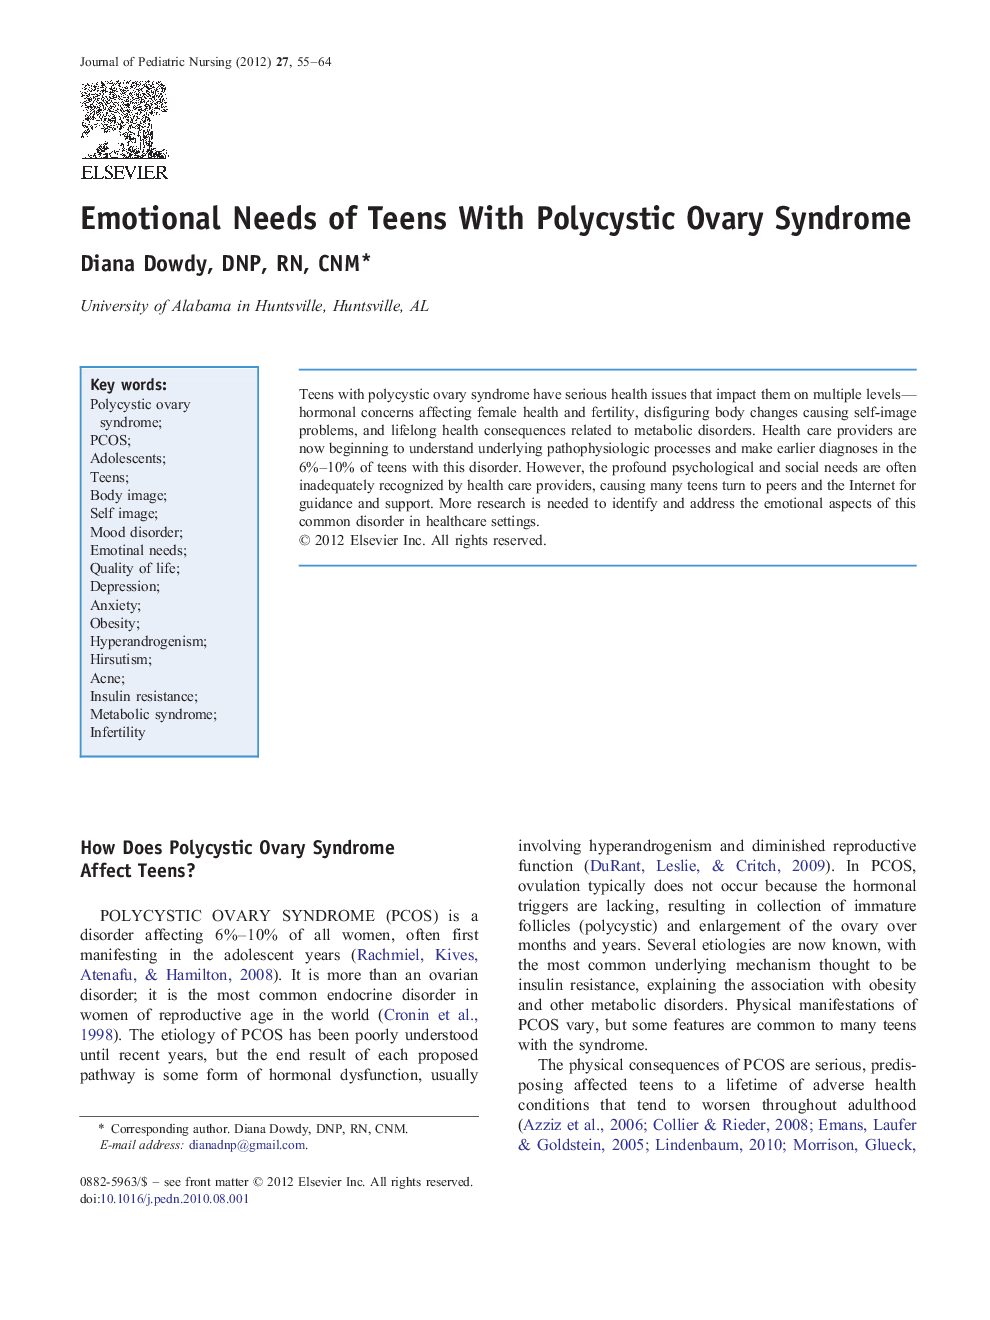 Emotional Needs of Teens With Polycystic Ovary Syndrome